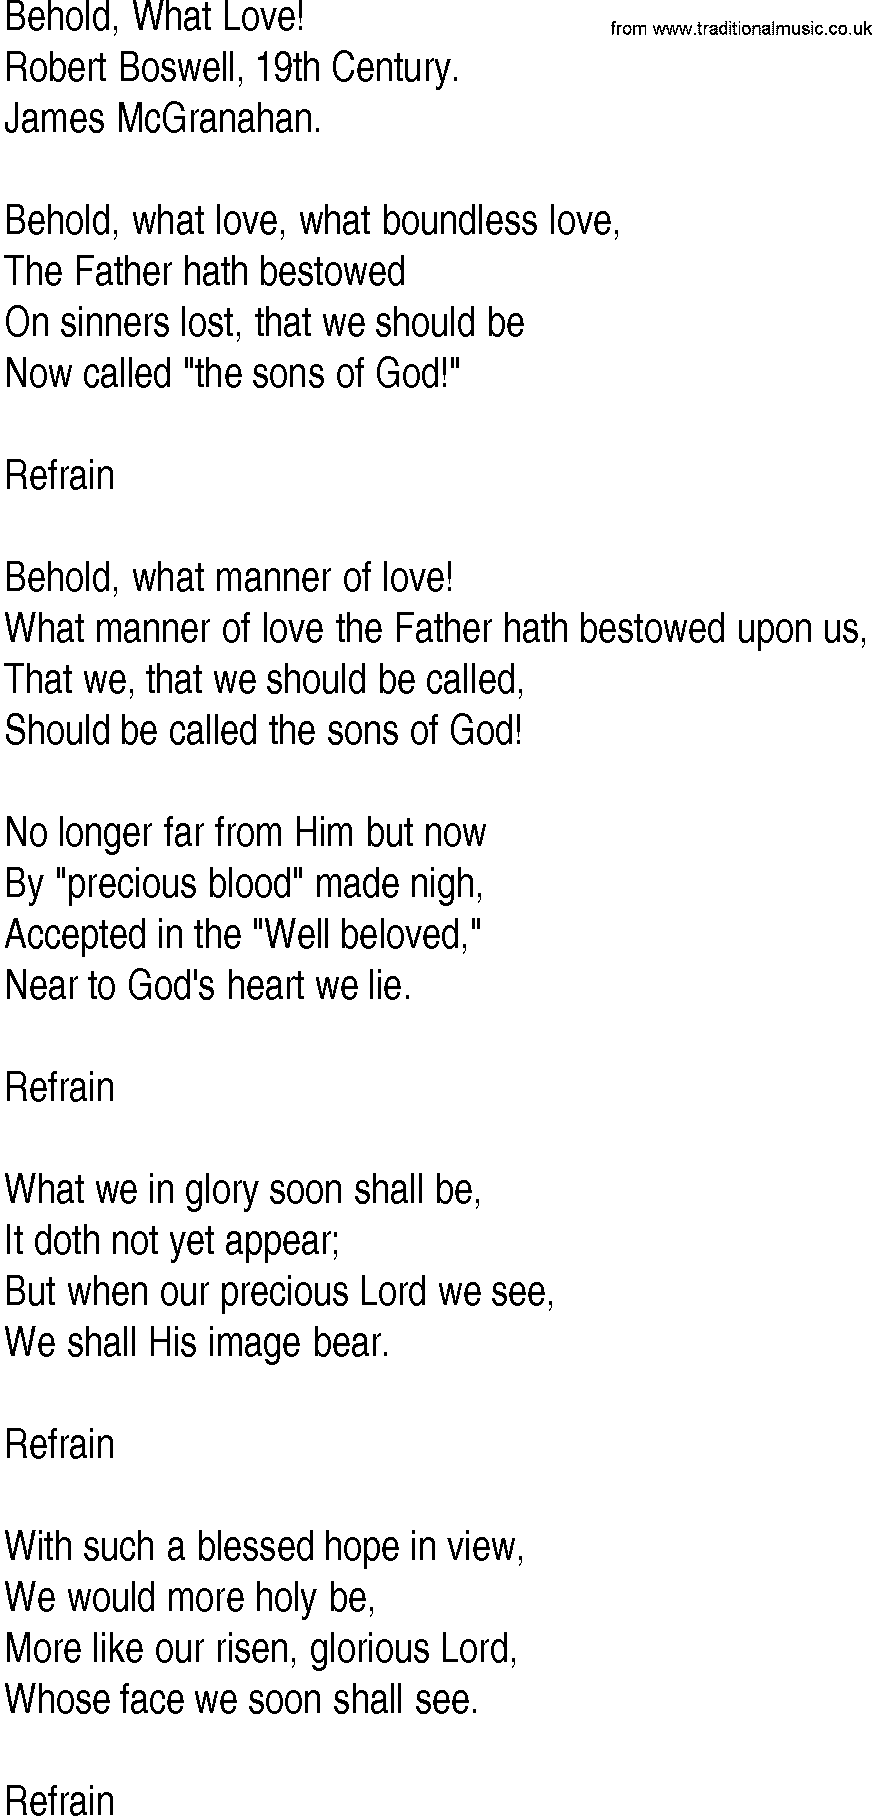 Hymn and Gospel Song: Behold, What Love! by Robert Boswell th Century lyrics